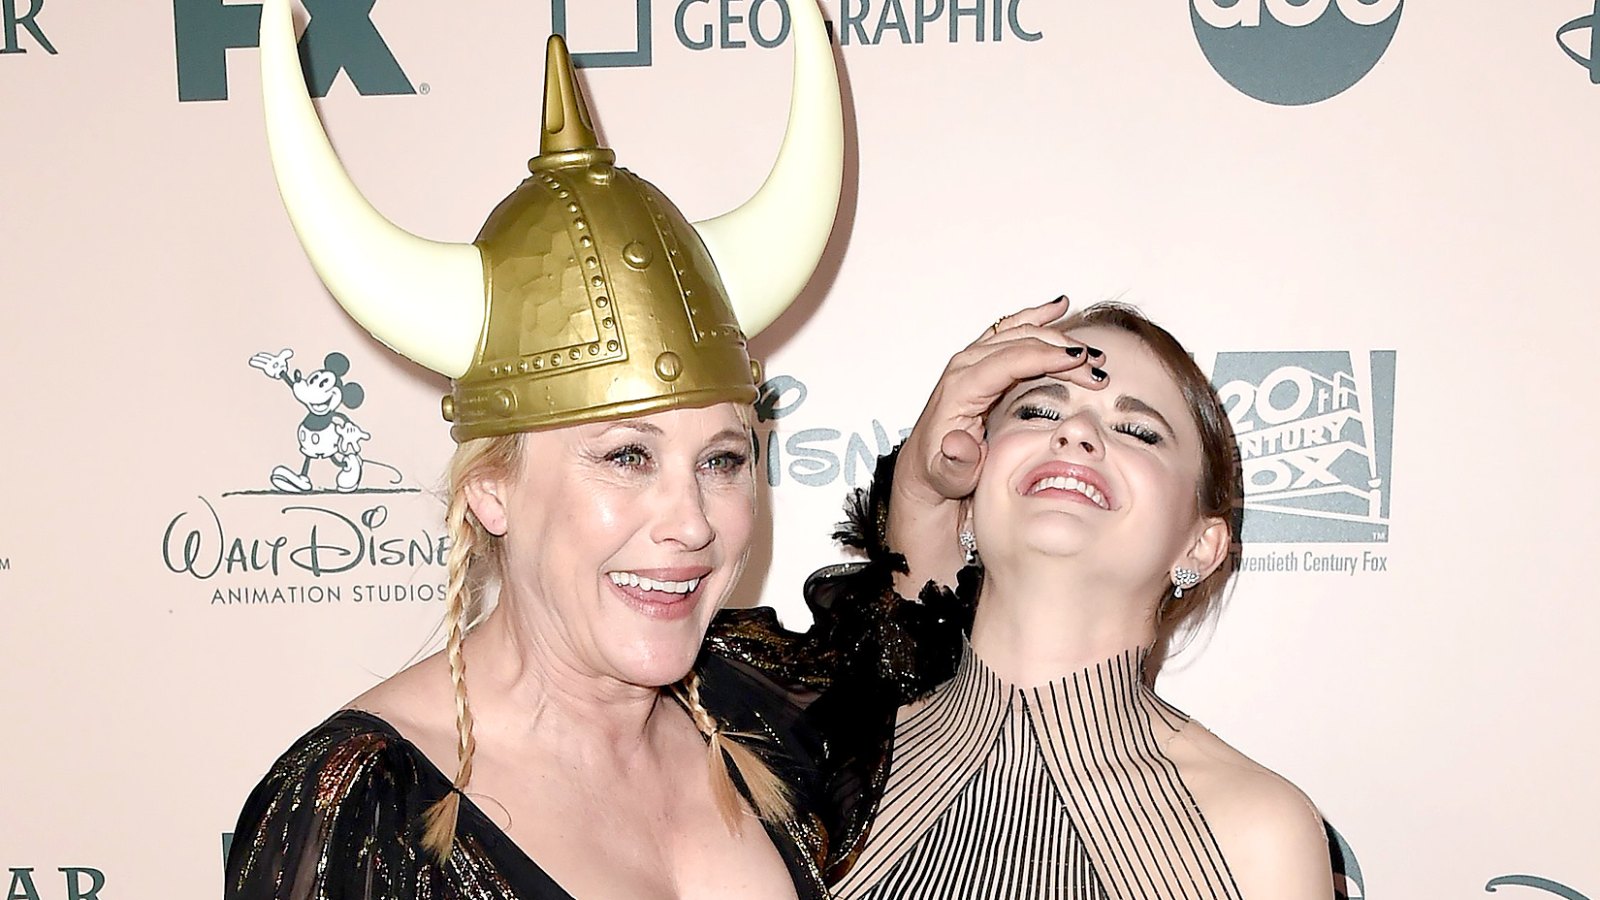 Patricia Arquette Accidentally Bruises Joey King With Her Golden Globe